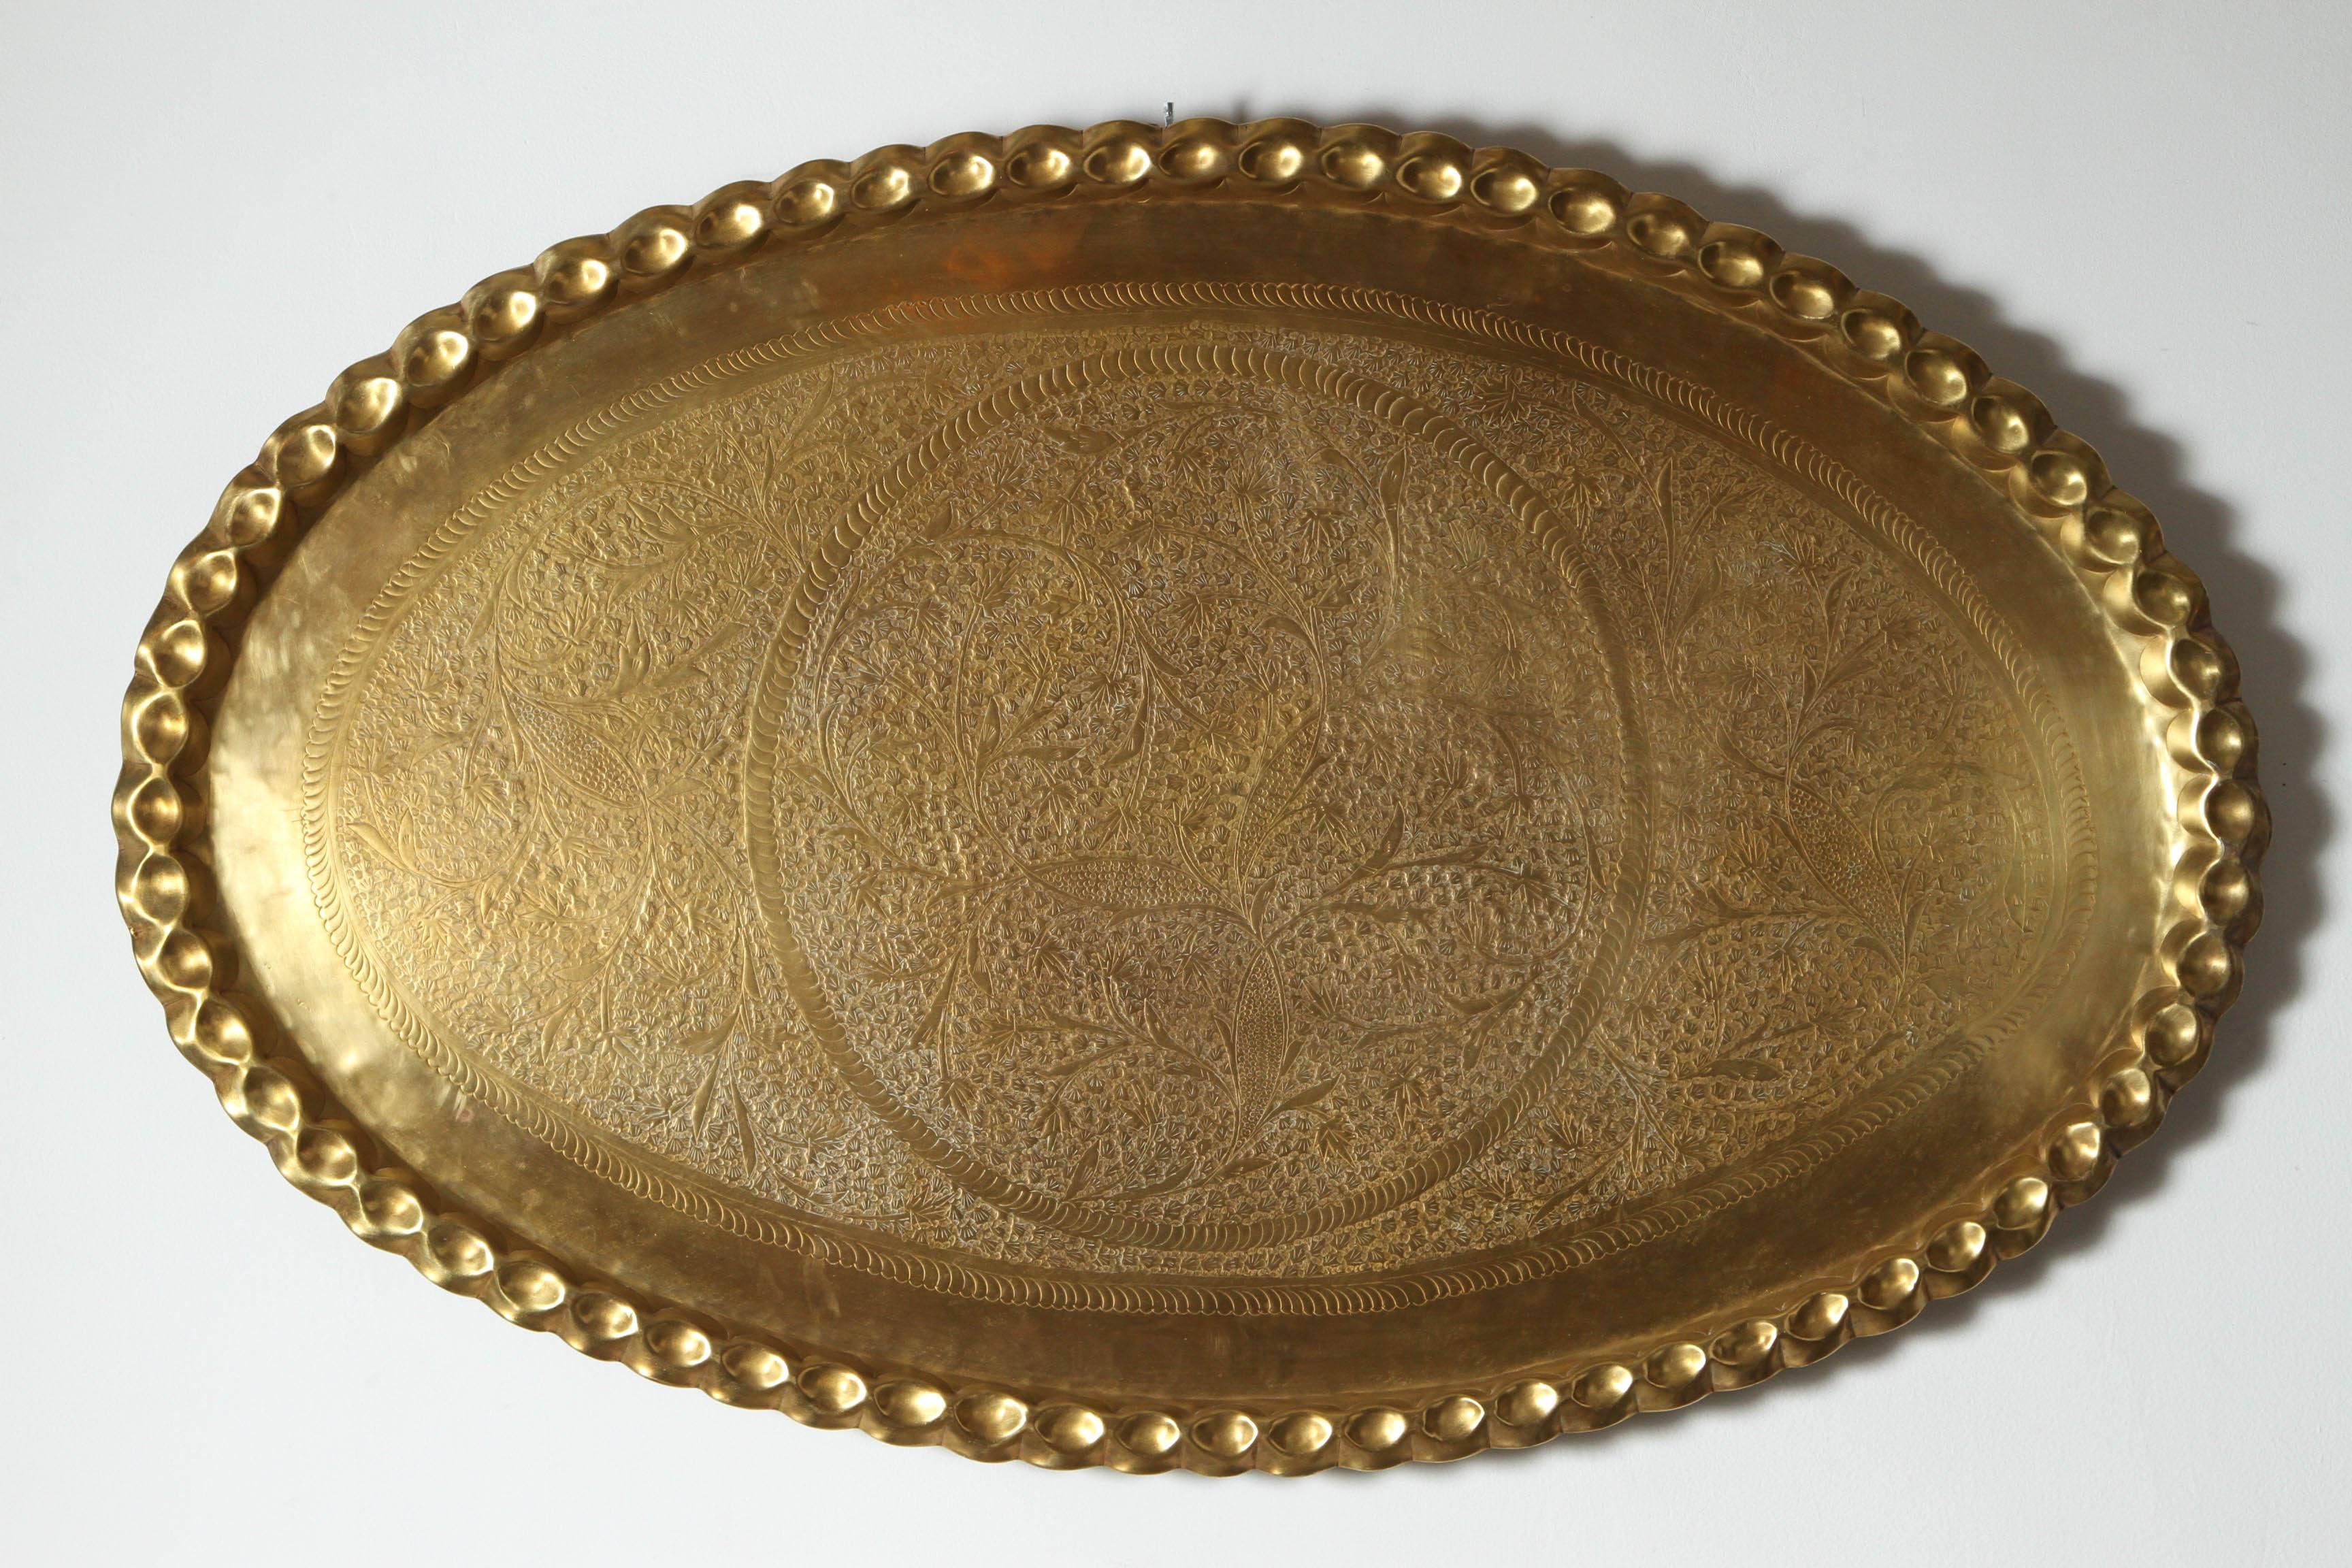 Mid century Modern stylish large oval hand-etched, hammered and embossed, chiseled Moroccan polished brass tray with pie crest edges.
Very finely hammered in floral Moorish designs, use it on a large ottoman, indoor or outdoor.
Has a hook in the